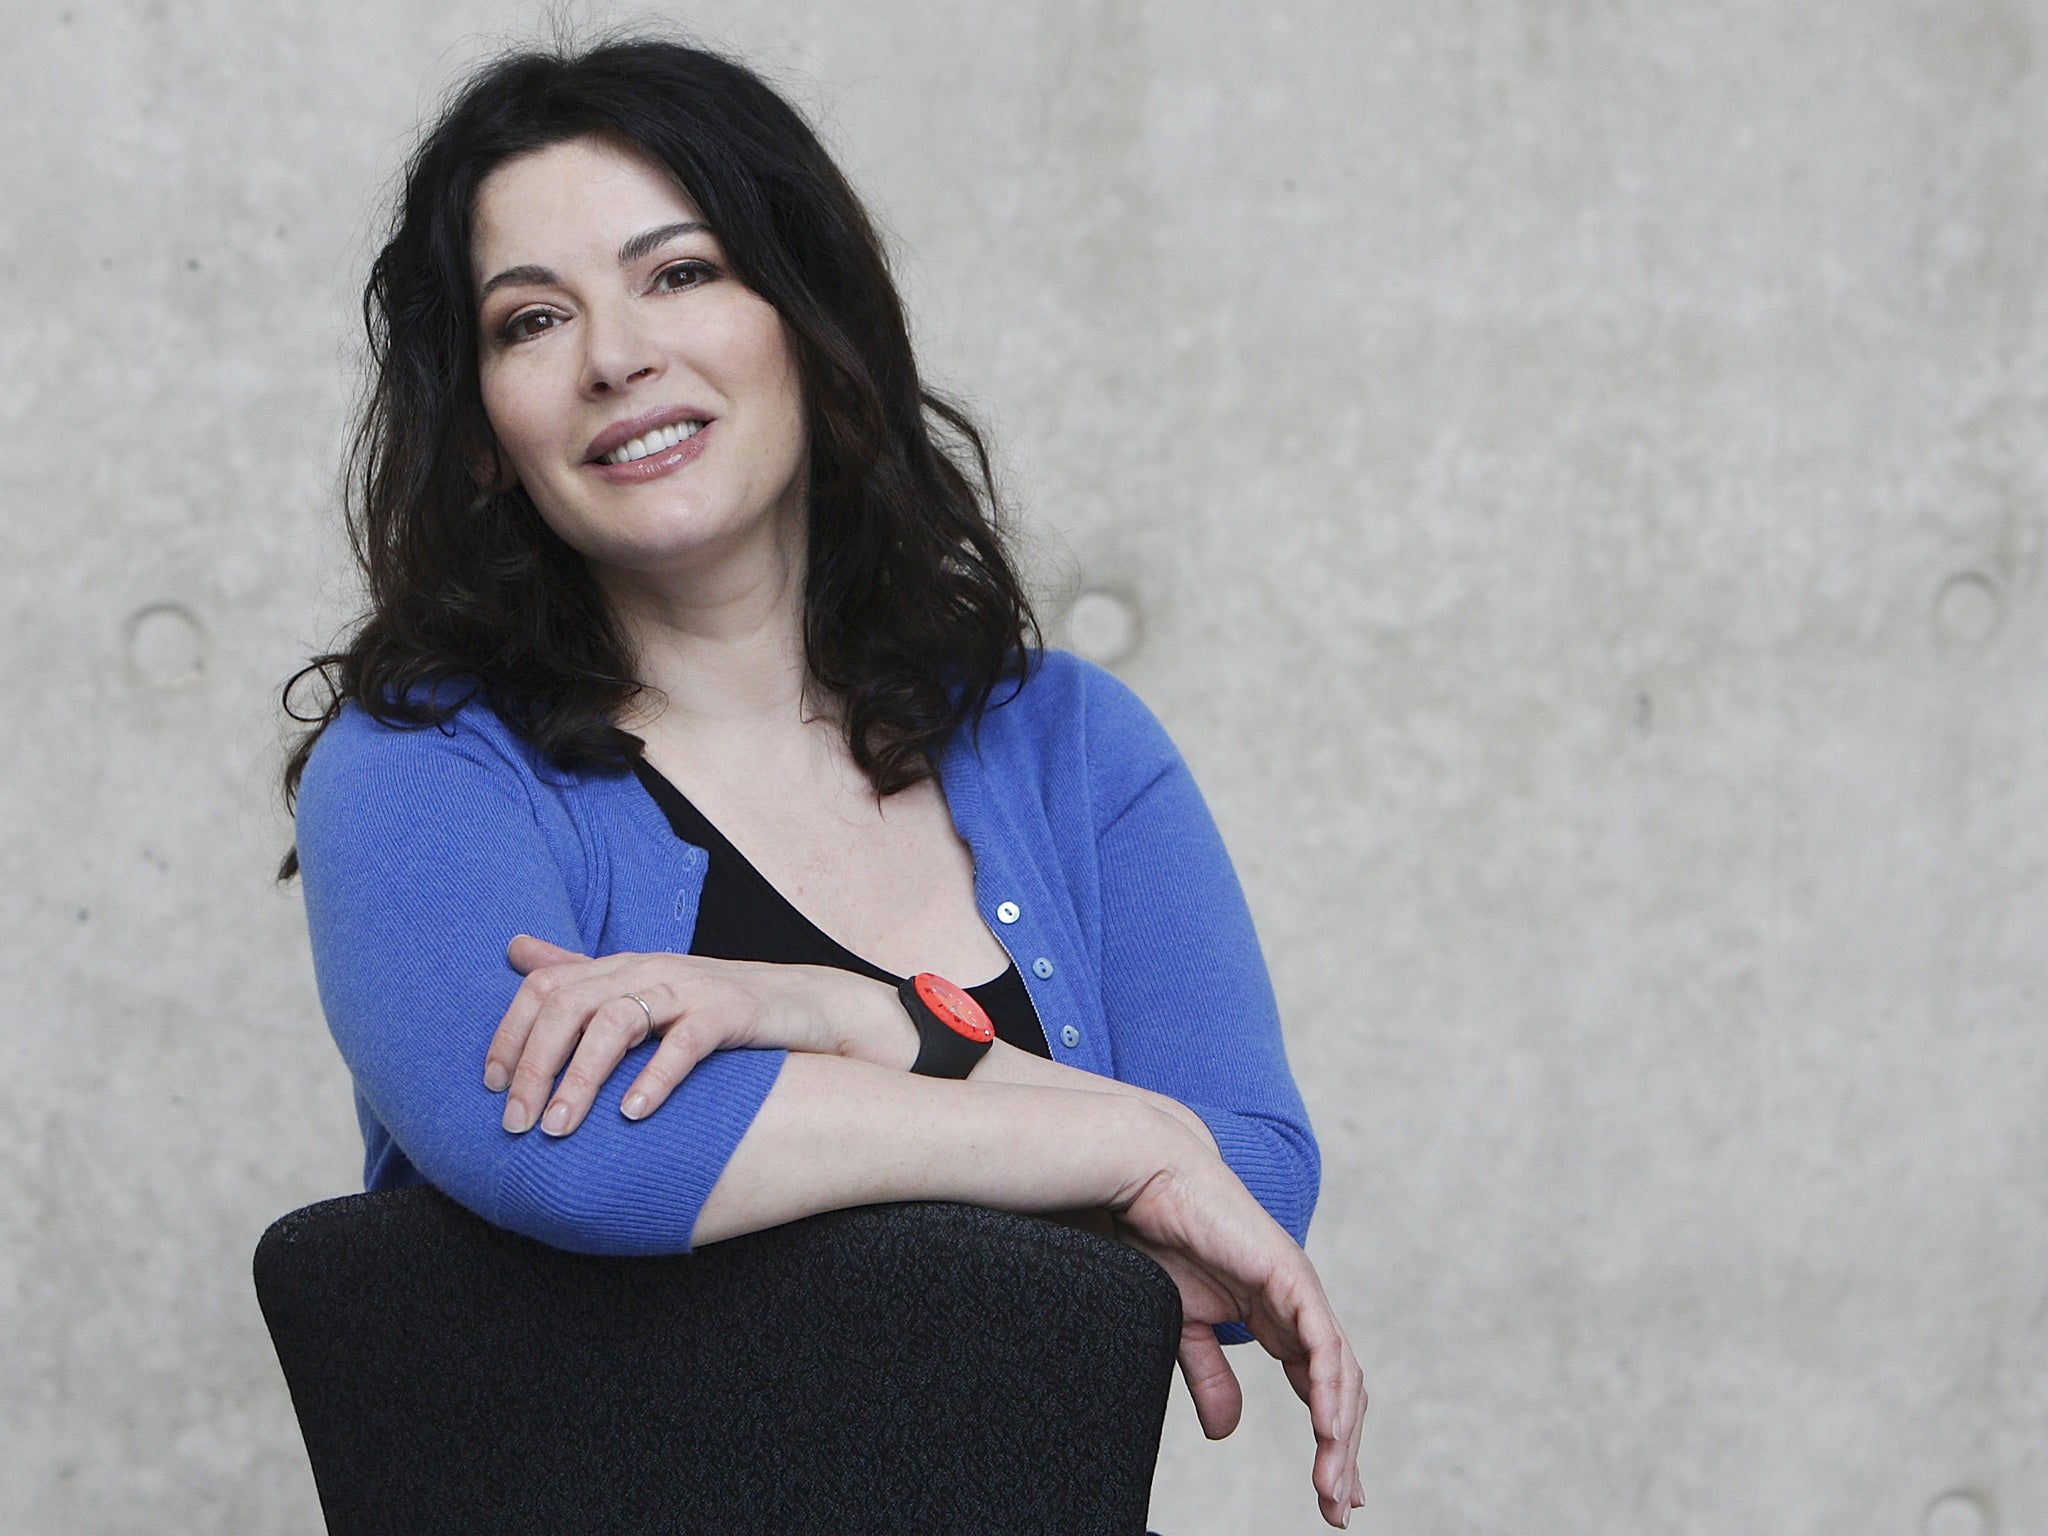 Nigella Lawson will have a key role in the Eurovision Song Contest grand final